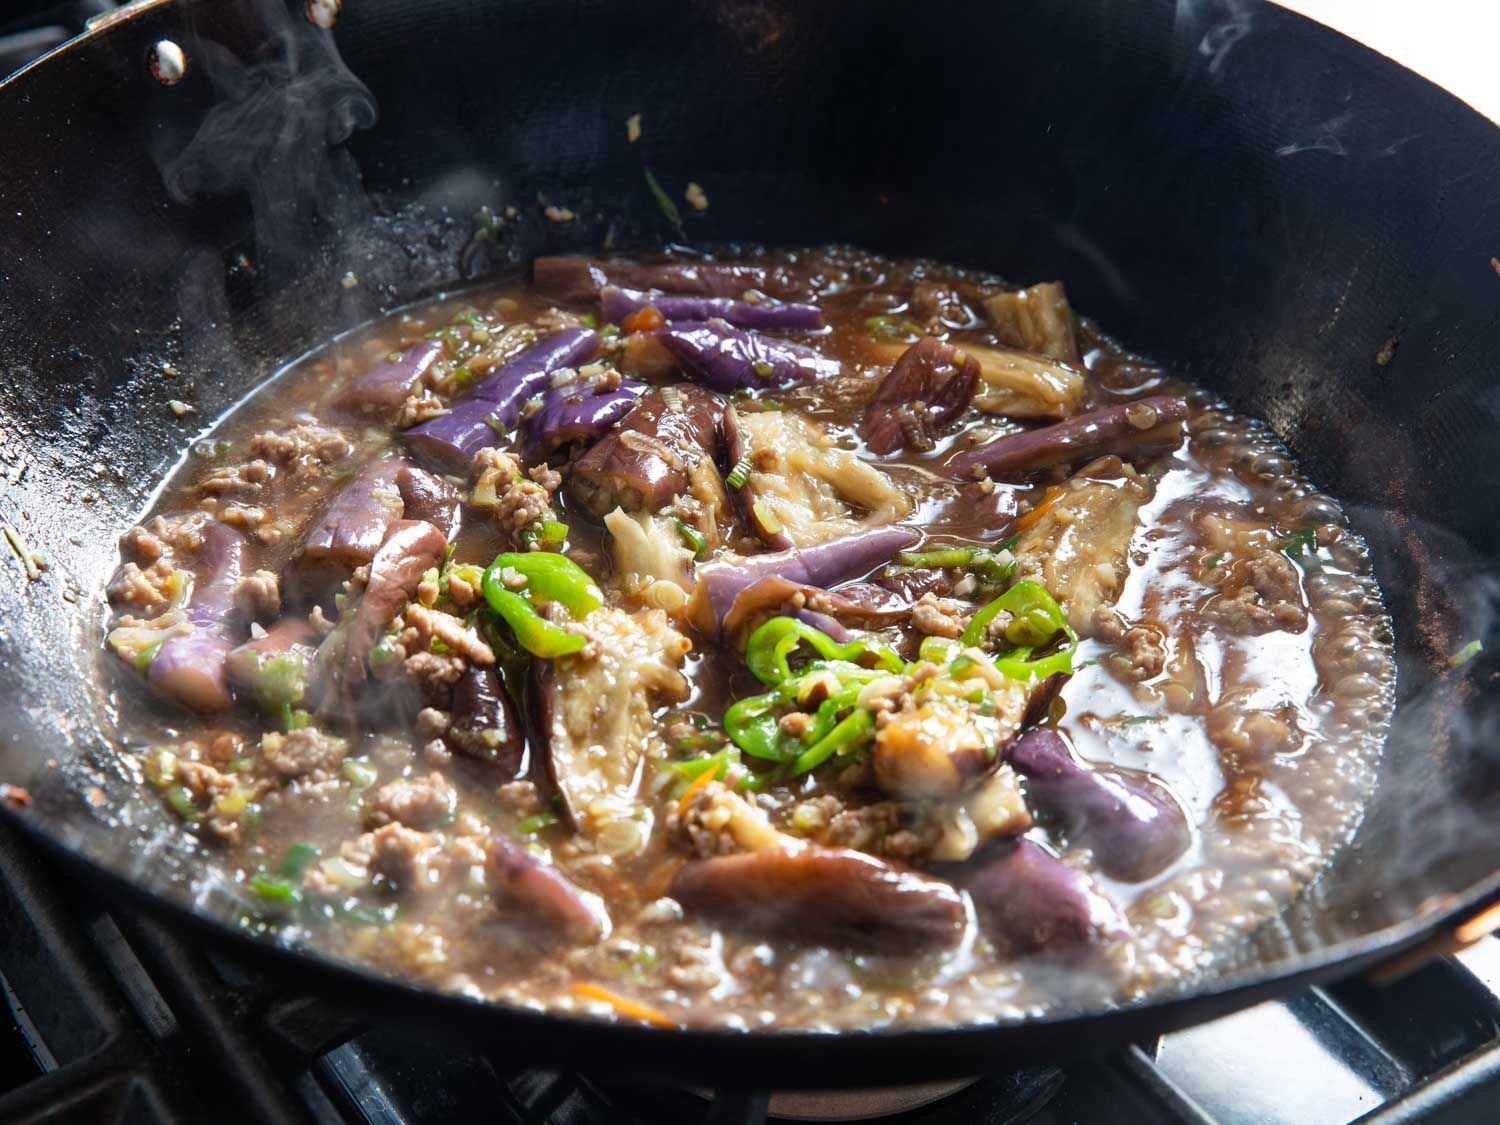 Sichuan eggplant simmering in a wok